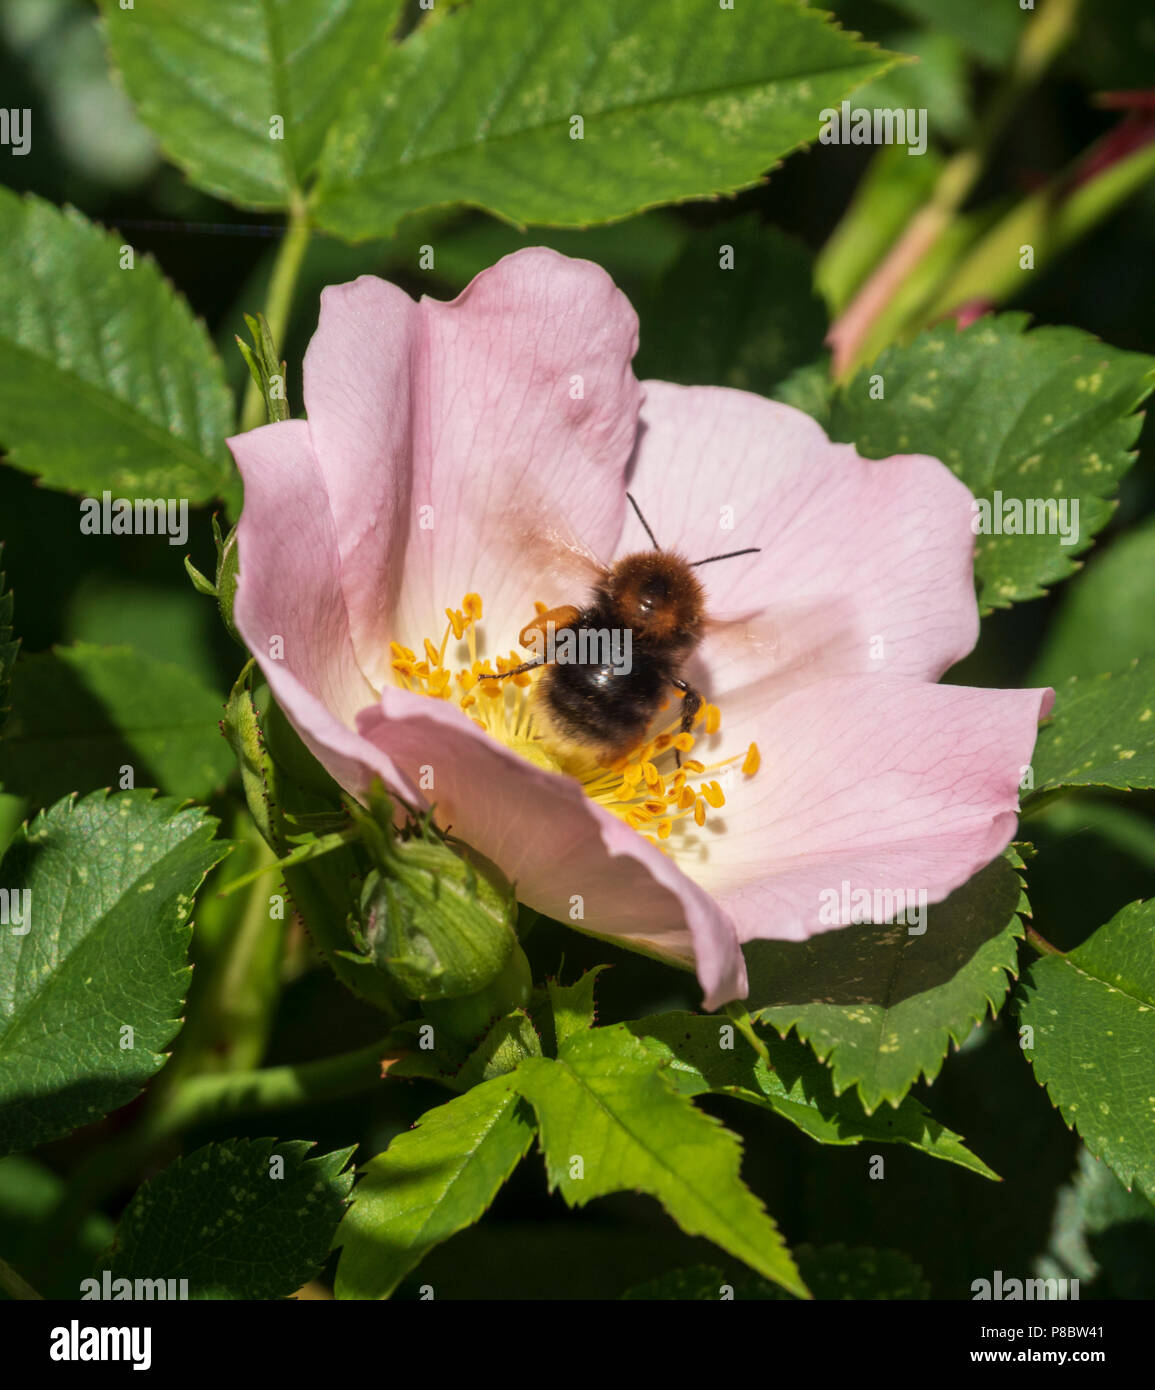 Garden flowers in Southern Scotland in early June - bee on Scottish wild rose, eglantine. Stock Photo